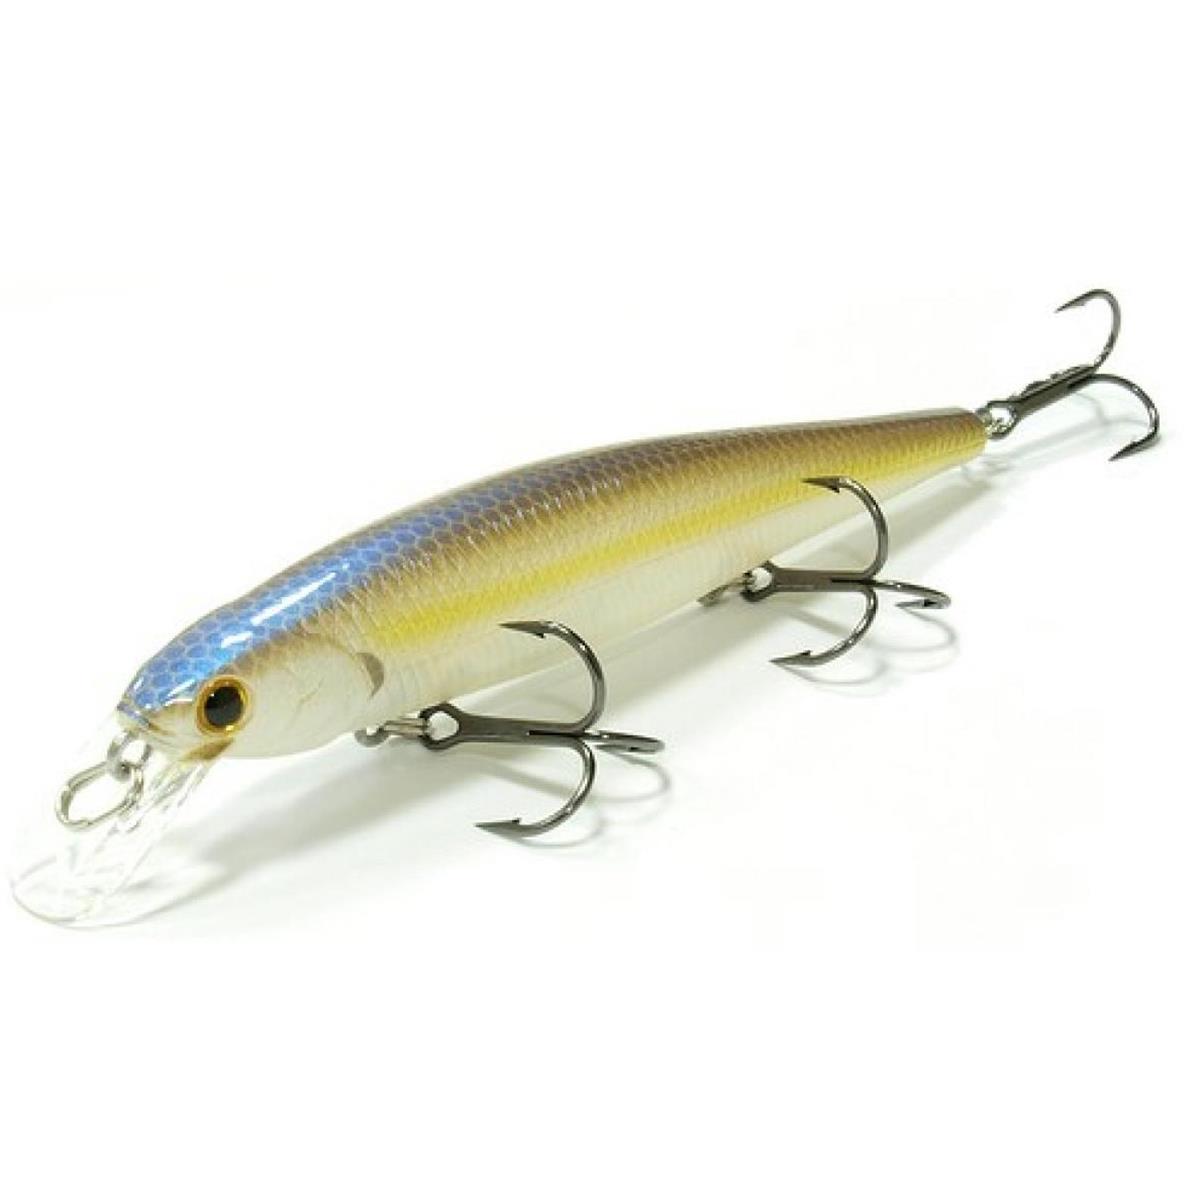 воблер pointer 78dd 250 chartreuse shad lucky craft Воблер Slender Pointer Chartreuse Shad Lucky Craft